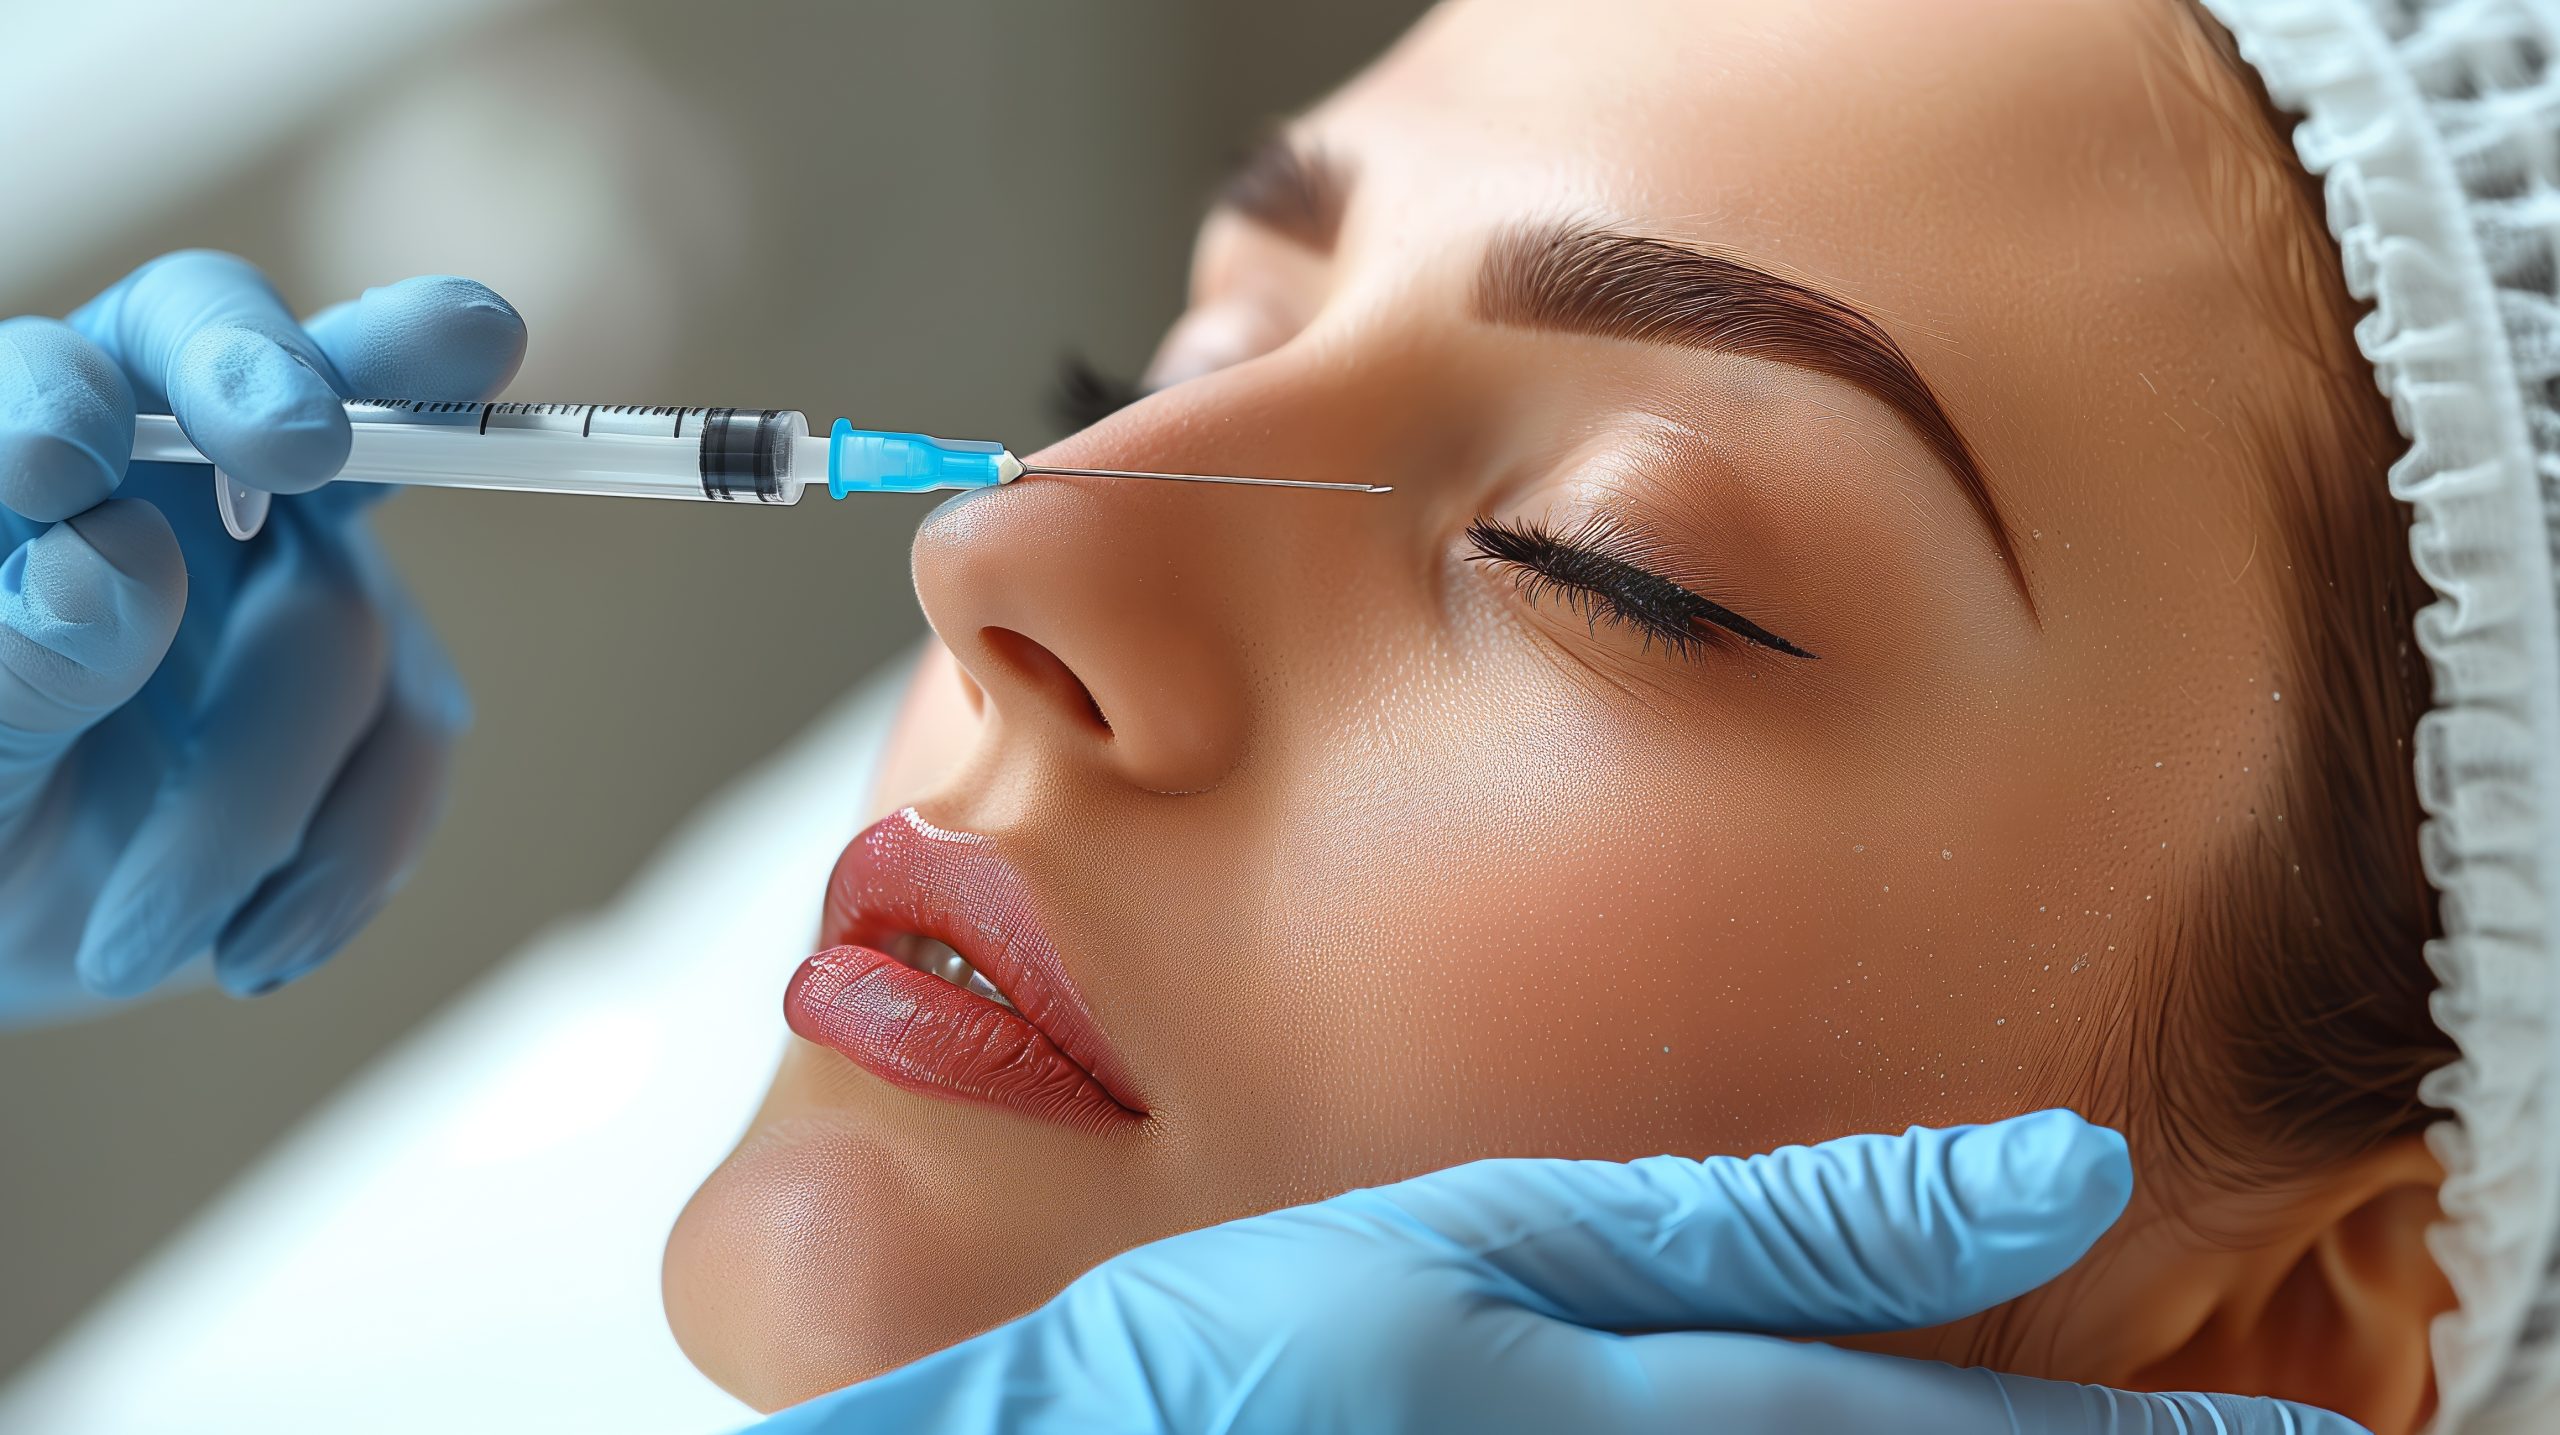 Tips for Keeping Your Injectables Looking Natural